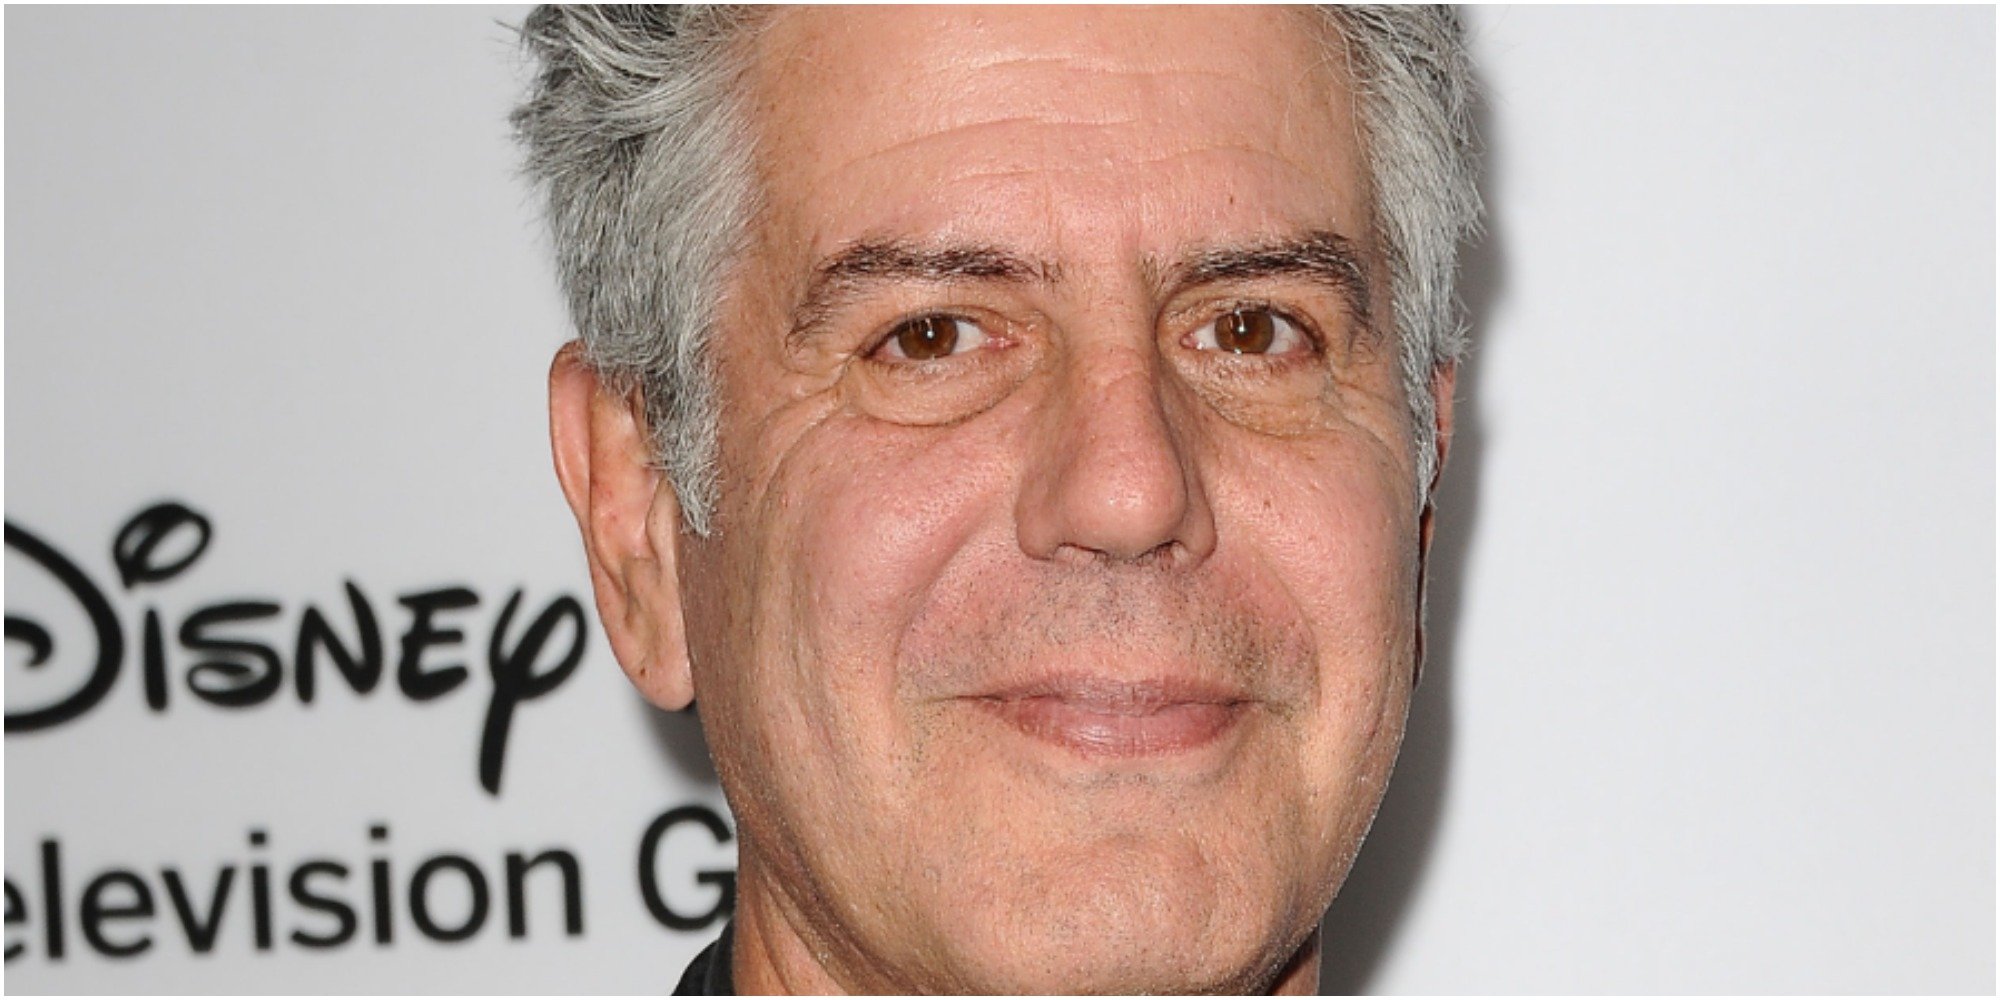 Anthony Bourdain is the subject of a new book.